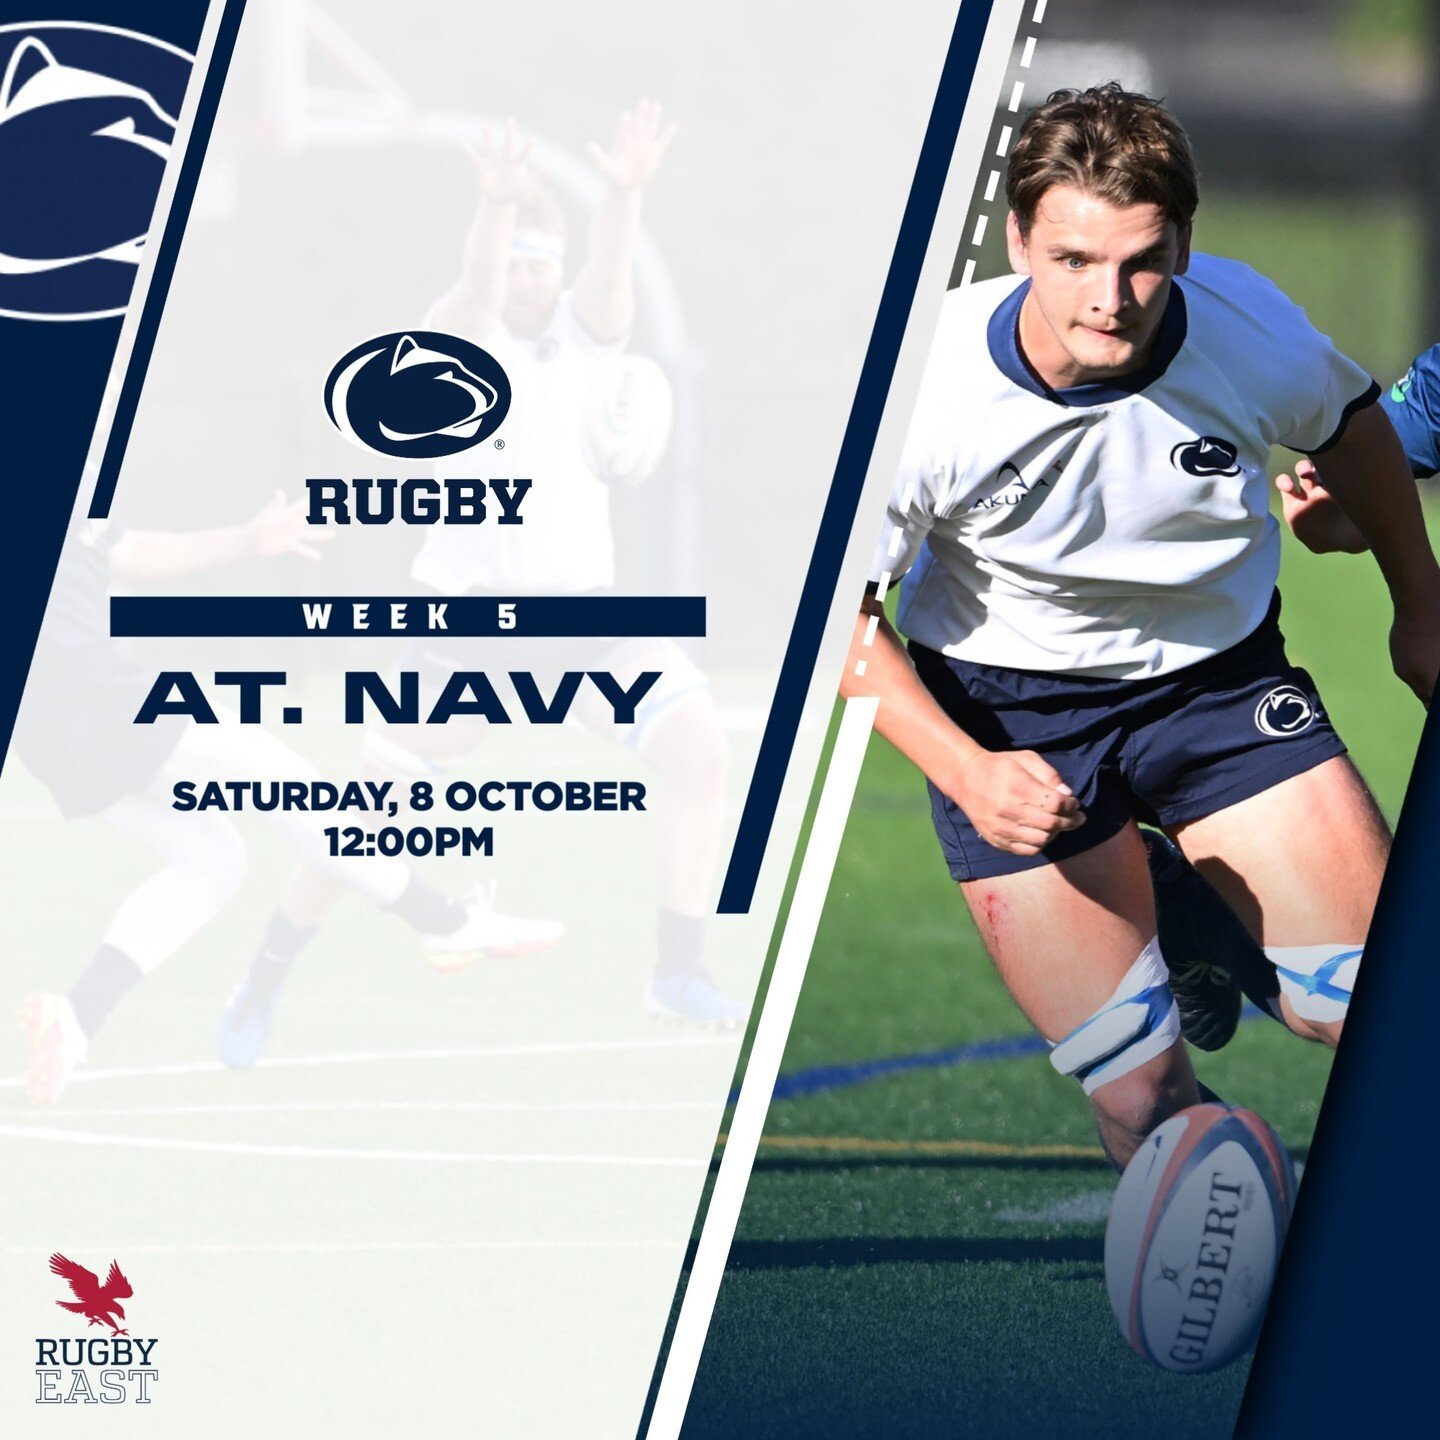 Back at it this week. After a Bye weekend Men's Rugby will return to Rugby East conference play Saturday, 8 October. 

📆 Saturday, 8 October
🆚 Navy
⏱ 12:00pm
📍 Brigade Sports Complex, Annapolis, MD

📸: Steve Manuel